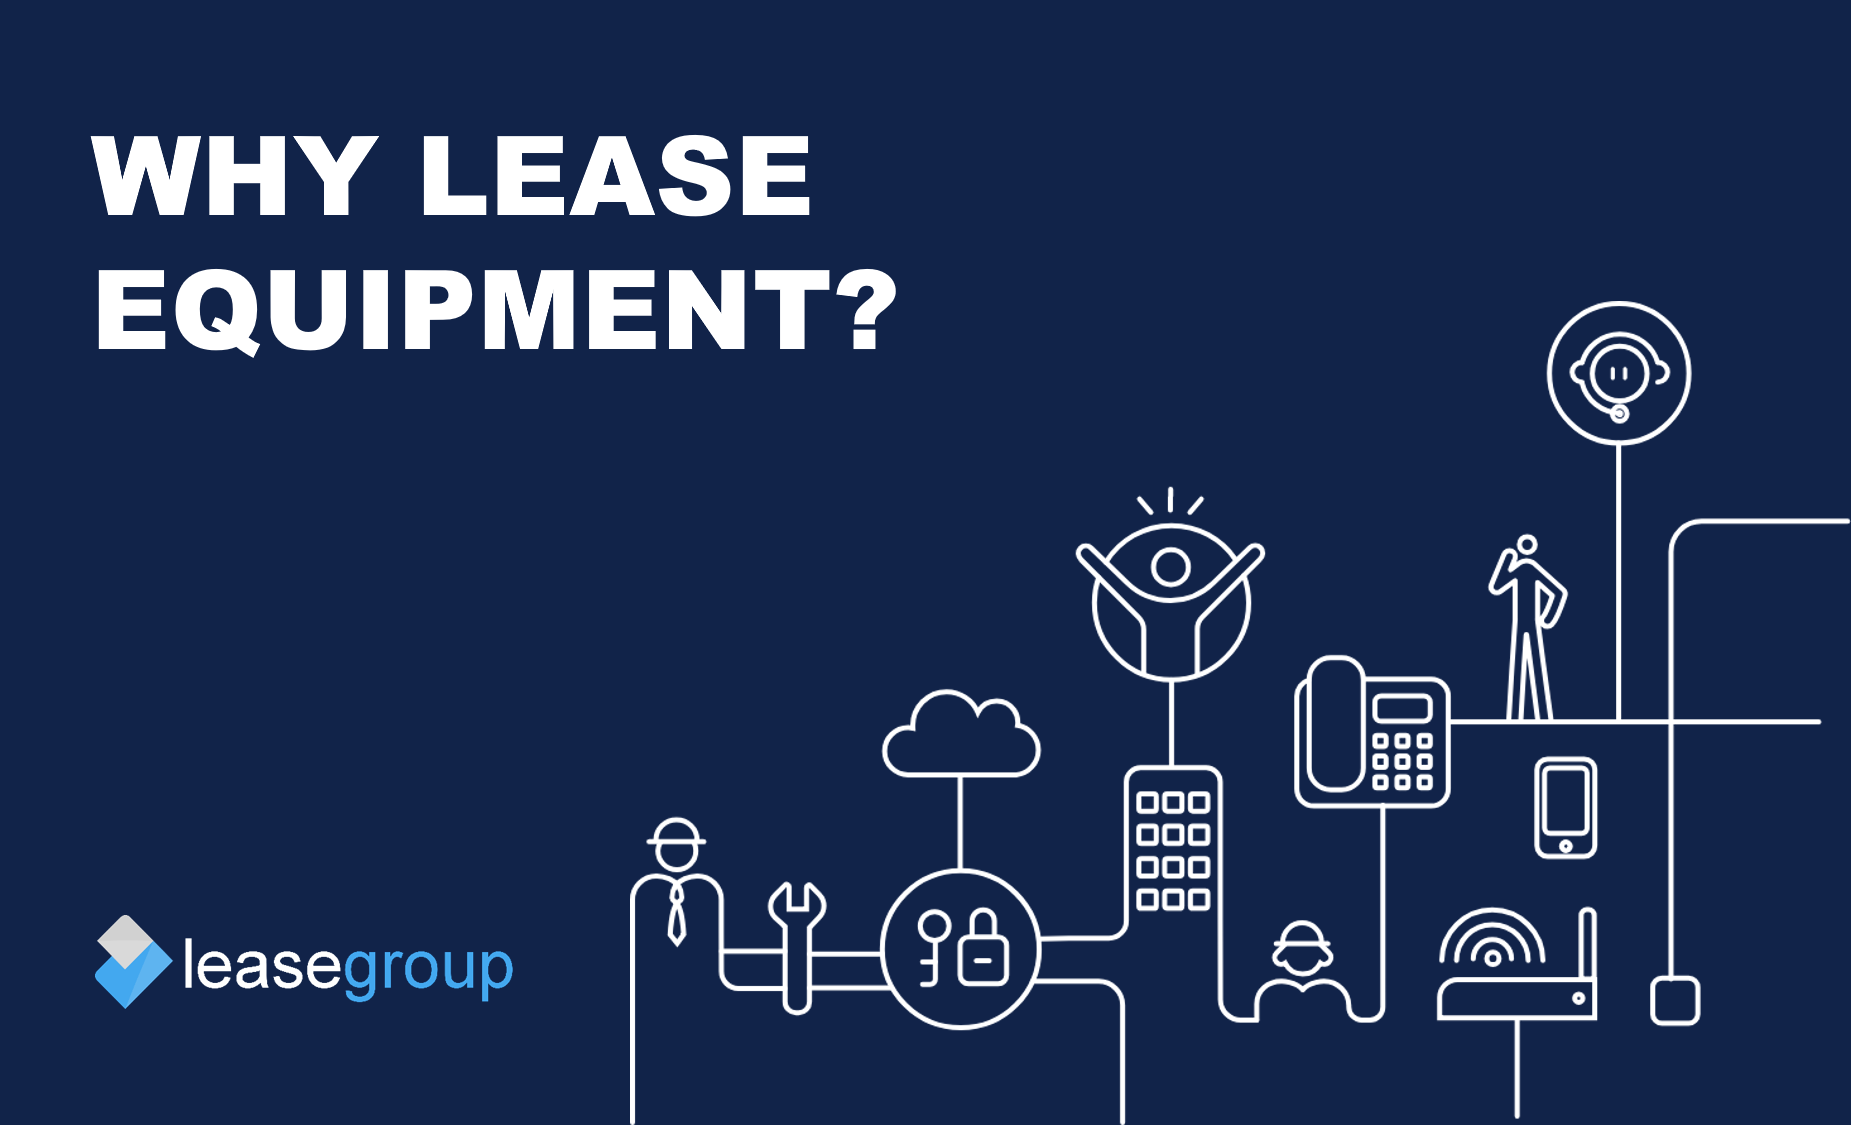 Why Lease Equipment for Small Businesses?